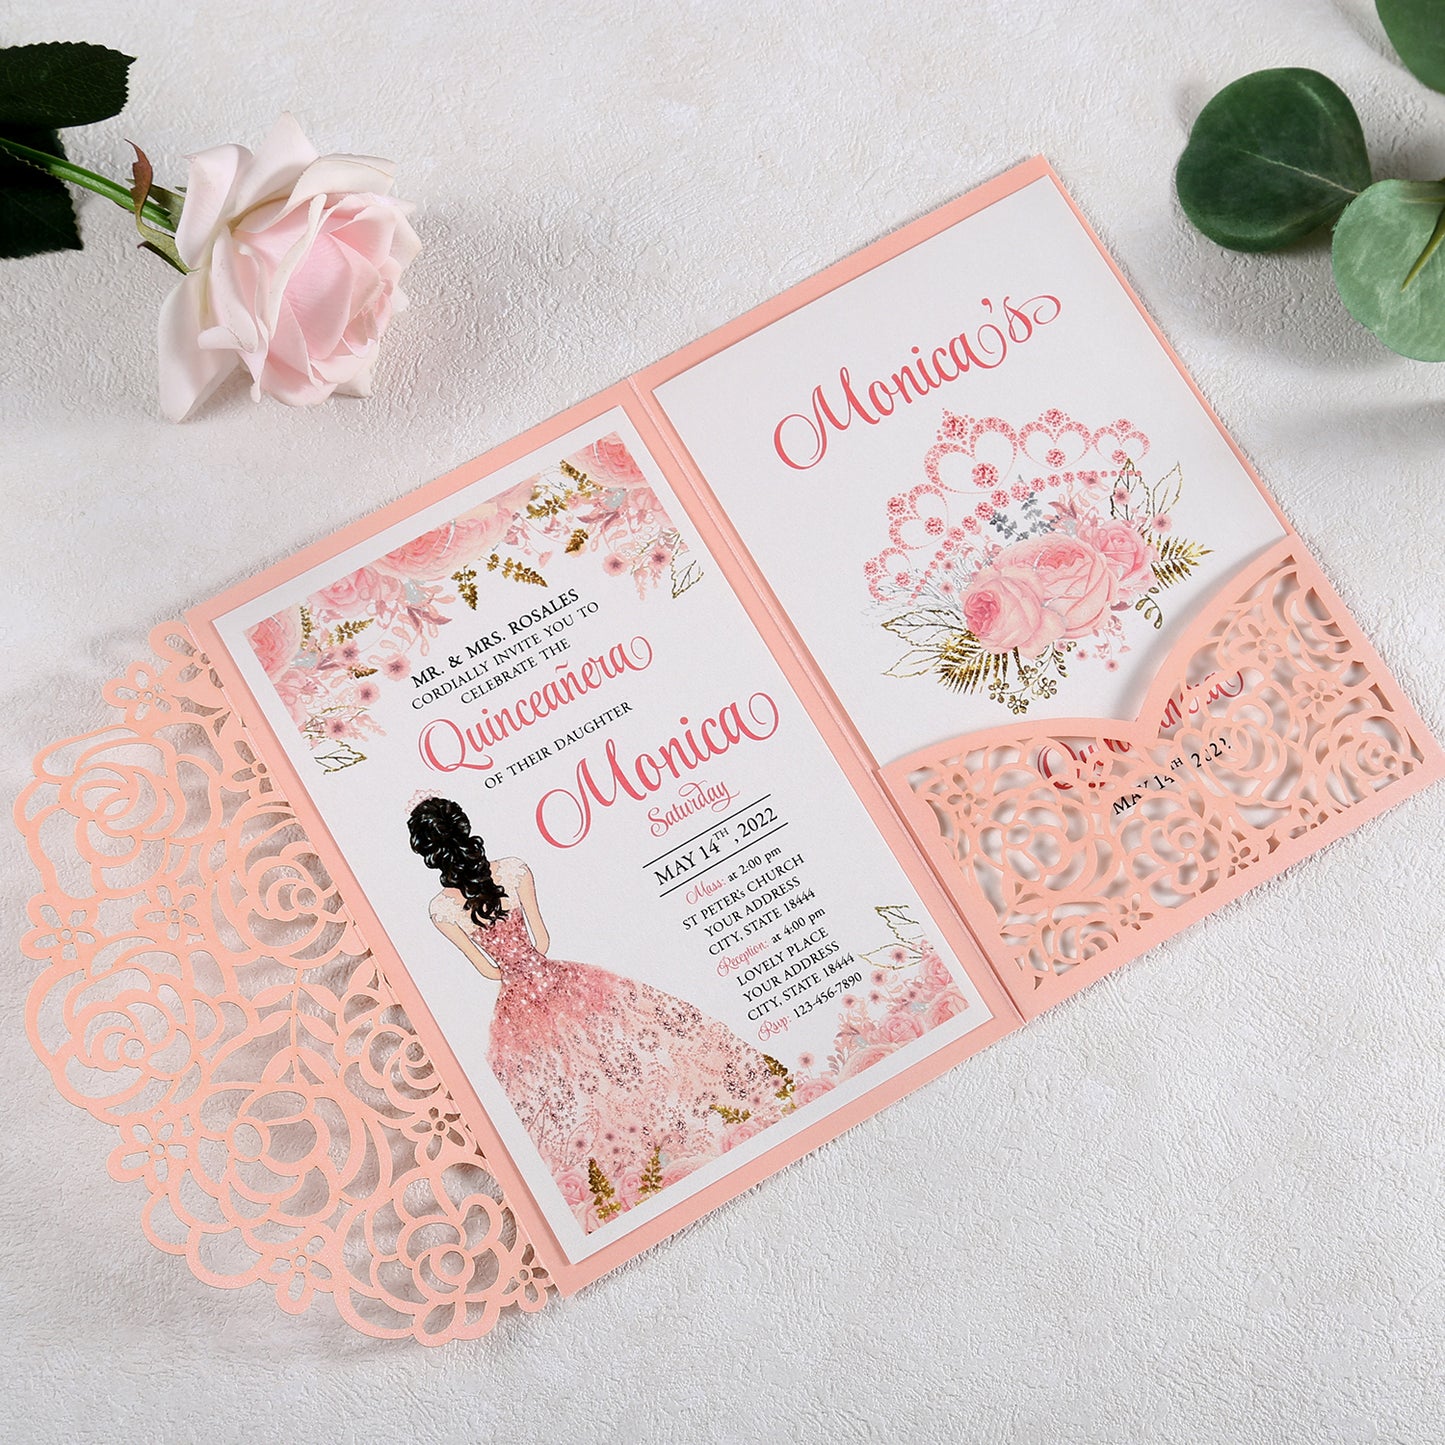 4.7 x7 inch Pink Laser Cut Hollow Rose Wedding Invitations Cards with Pearlized Pockets and Envelopes for Wedding Bridal Shower - DorisHome